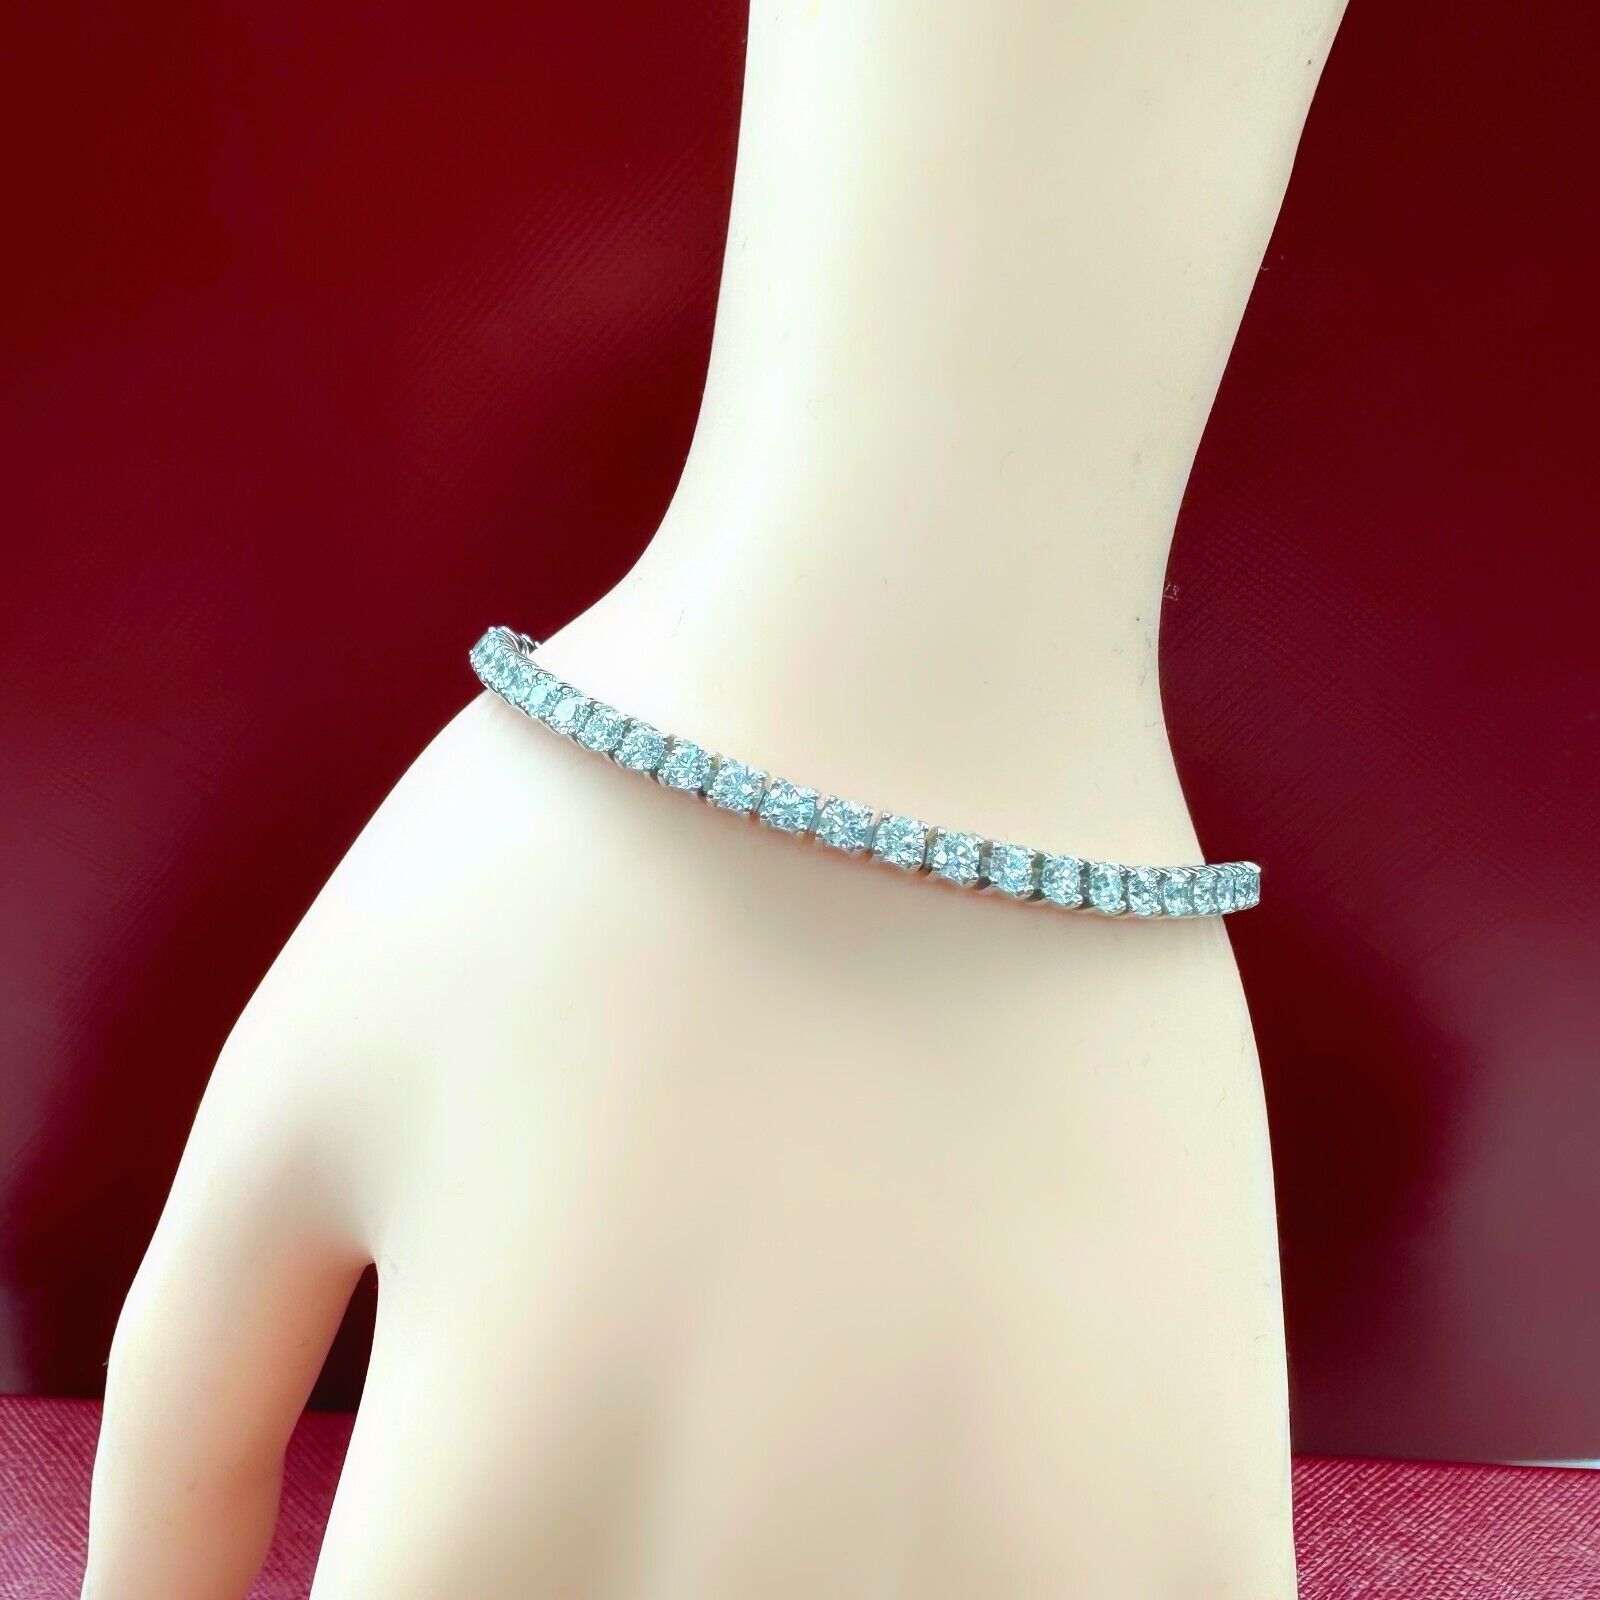 Wimbledon is here. Time for a tennis bracelet. - Something About Rocks